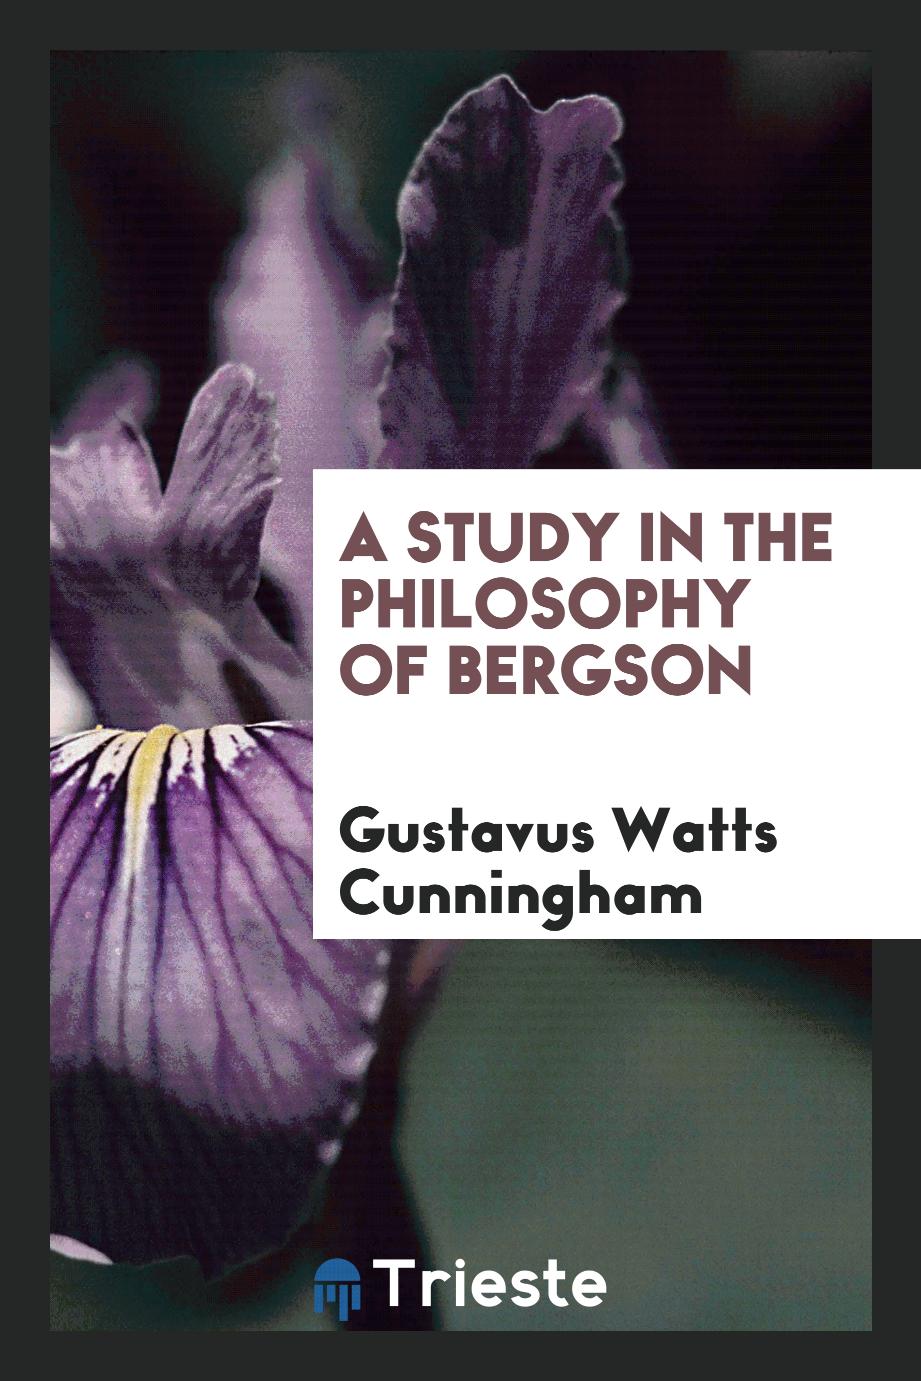 A study in the philosophy of Bergson